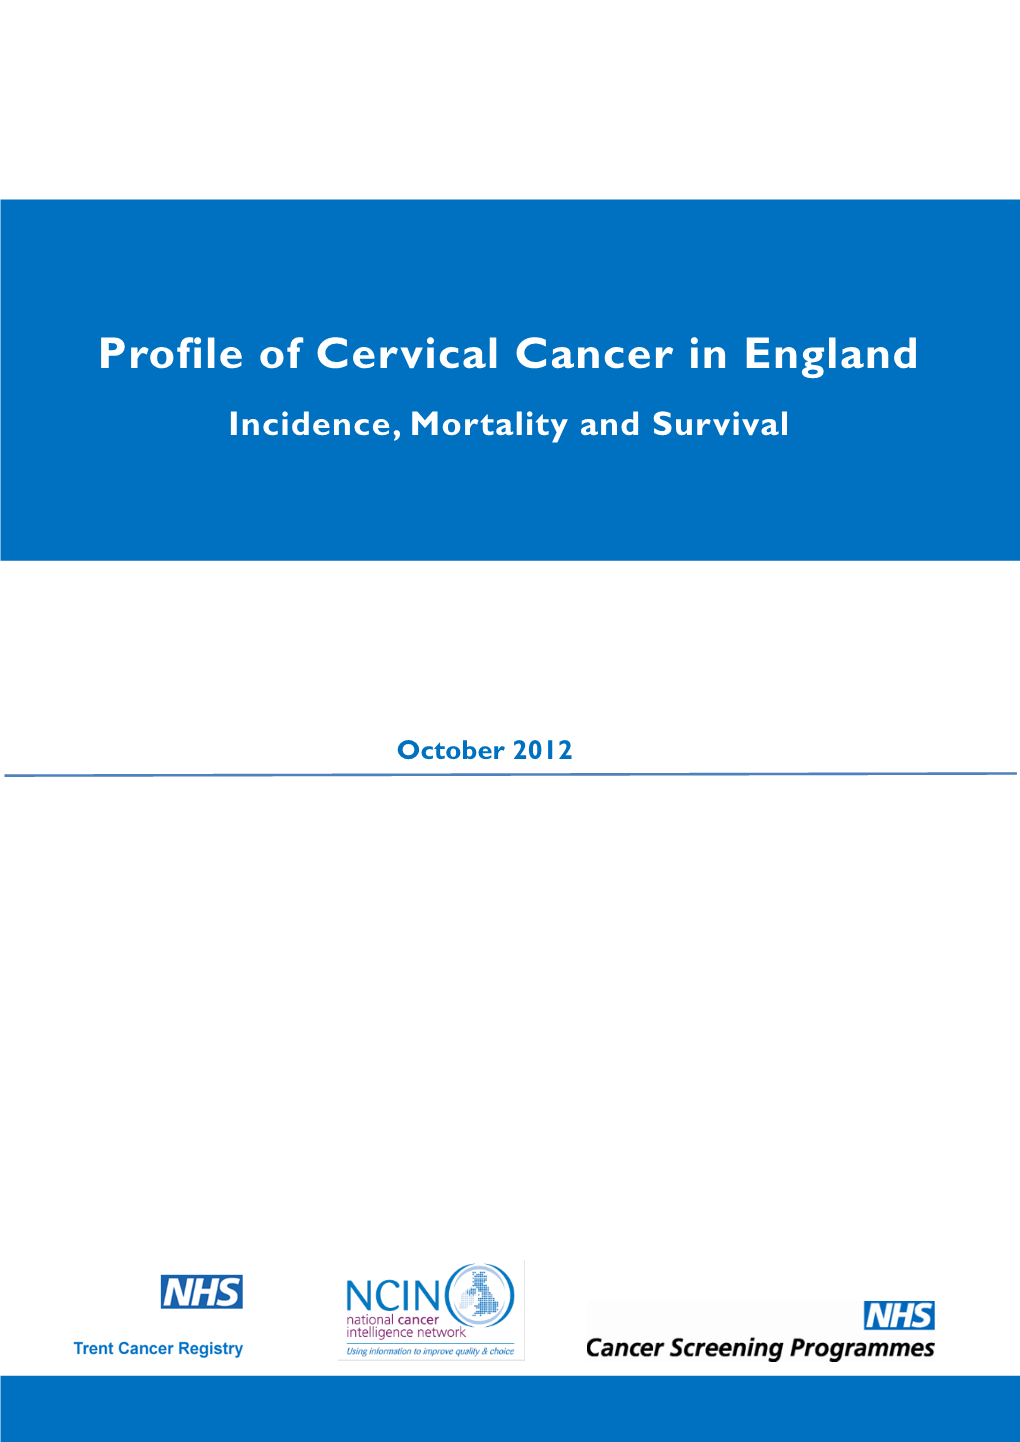 Profile of Cervical Cancer in England Incidence, Mortality and Survival